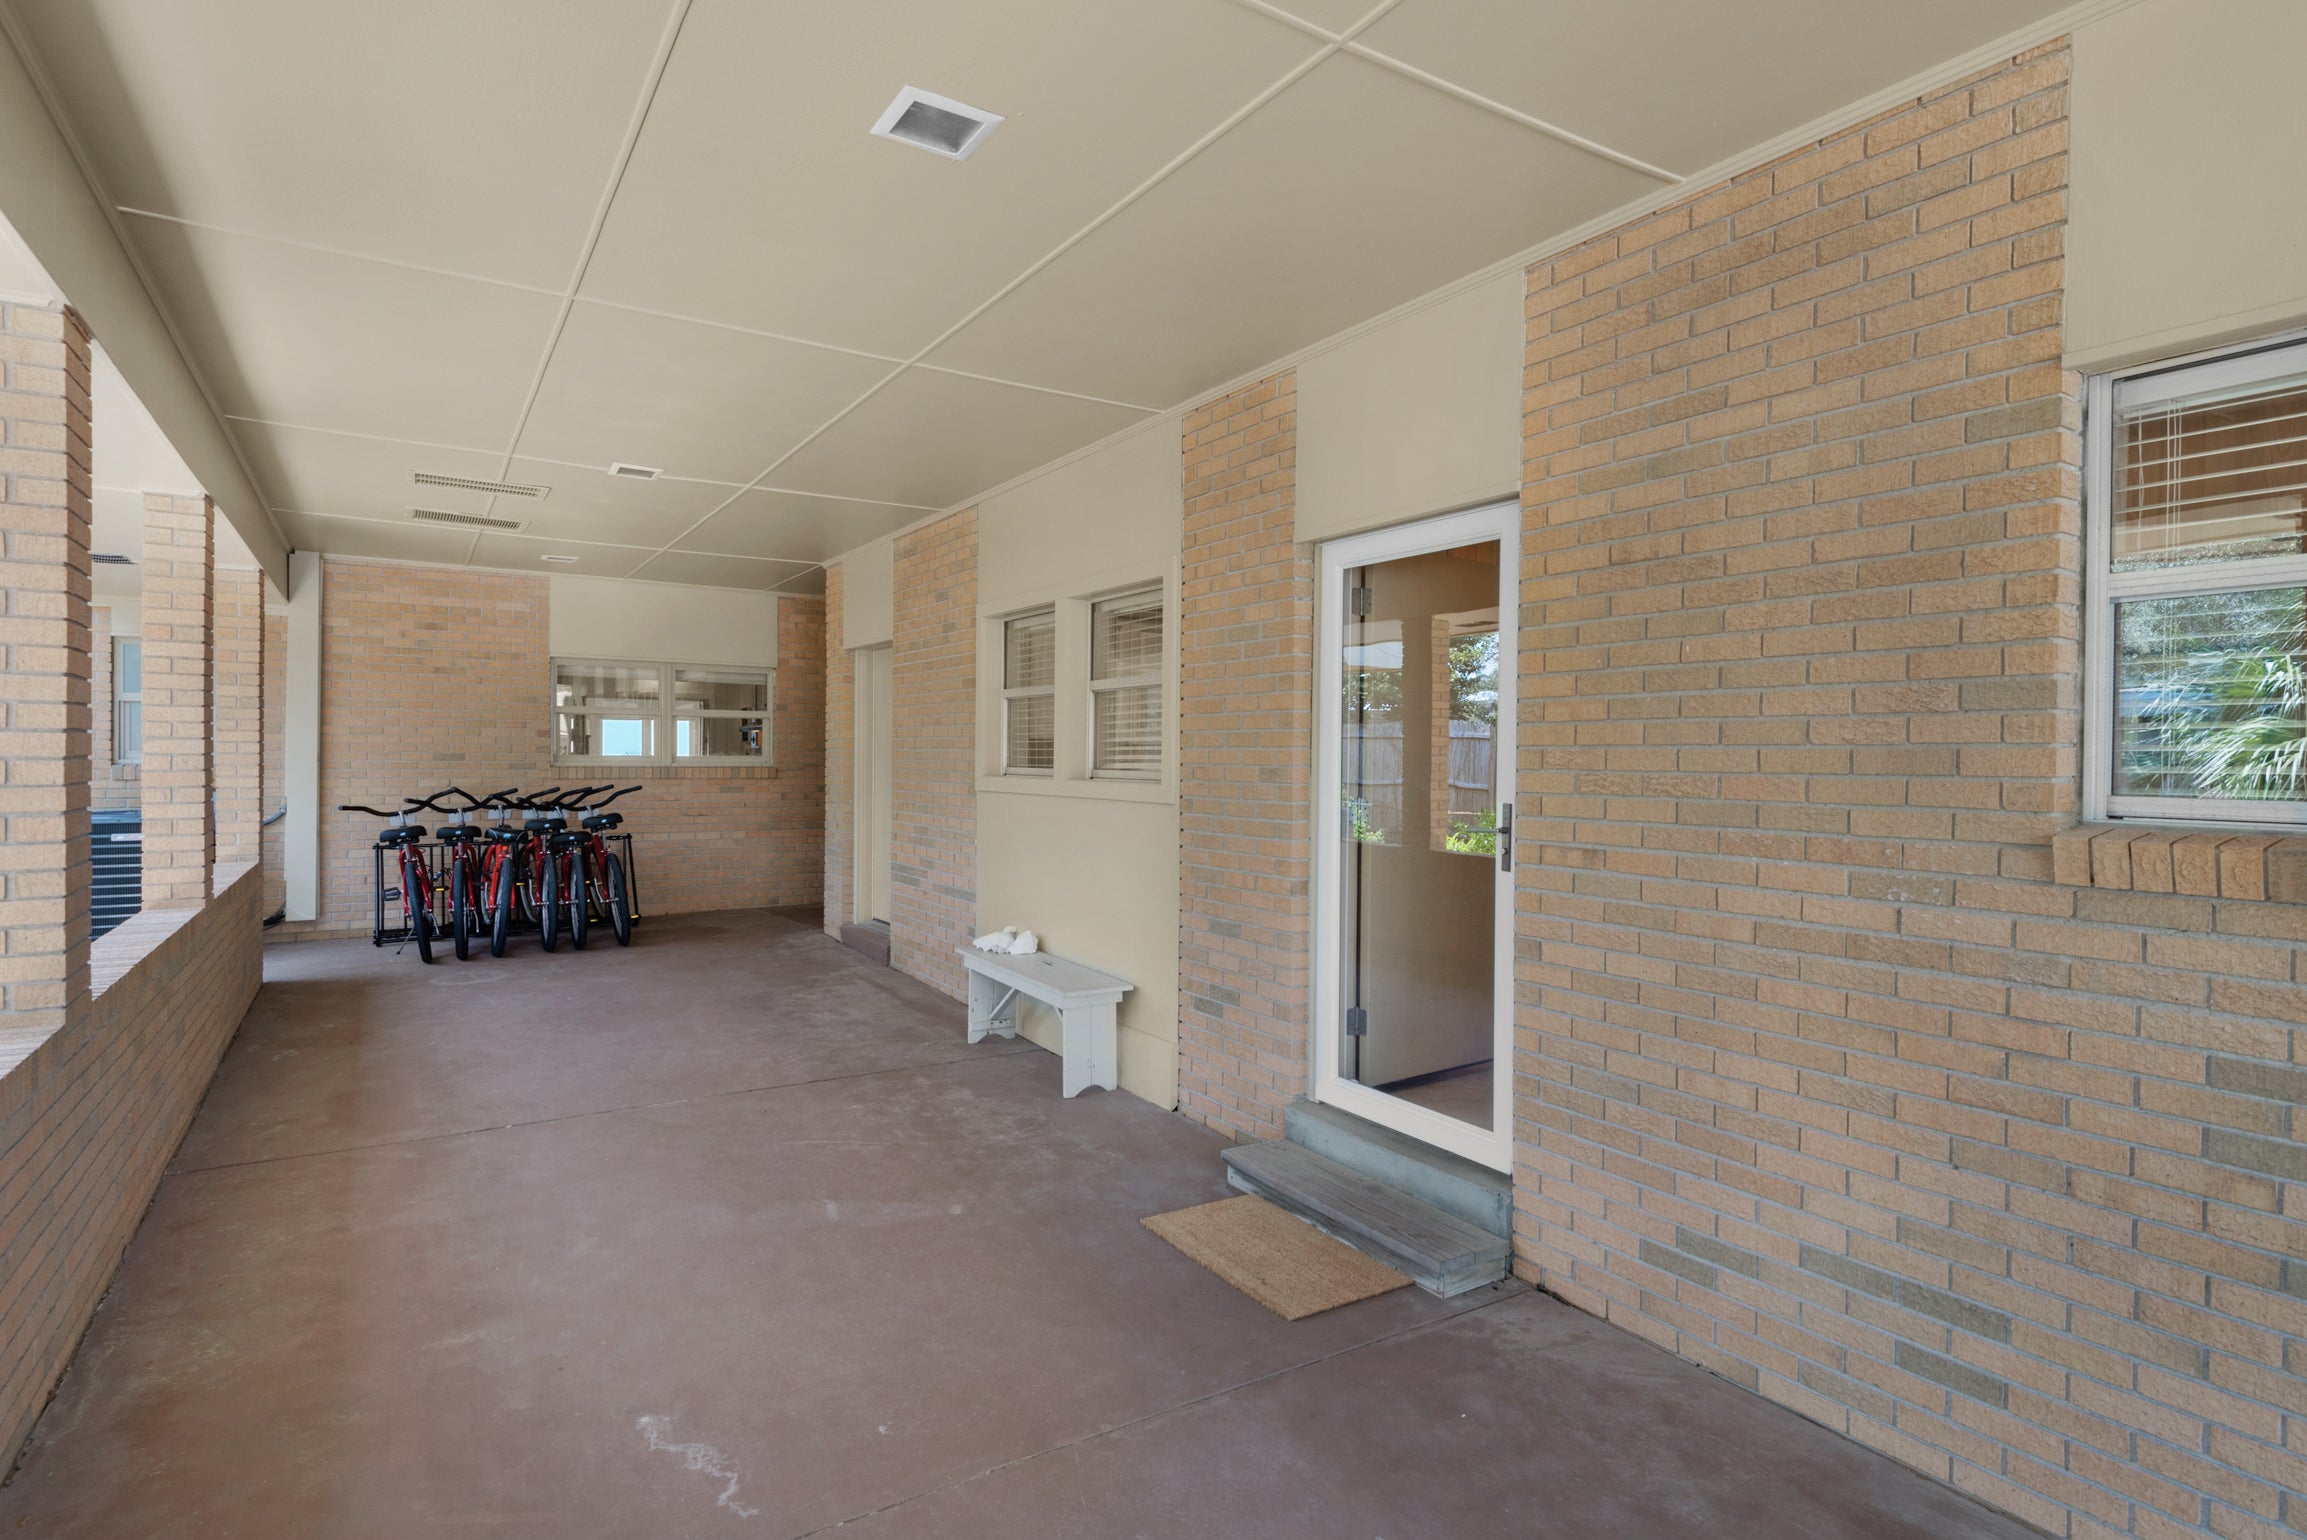 Convenient Breezeway connects the Two Homes